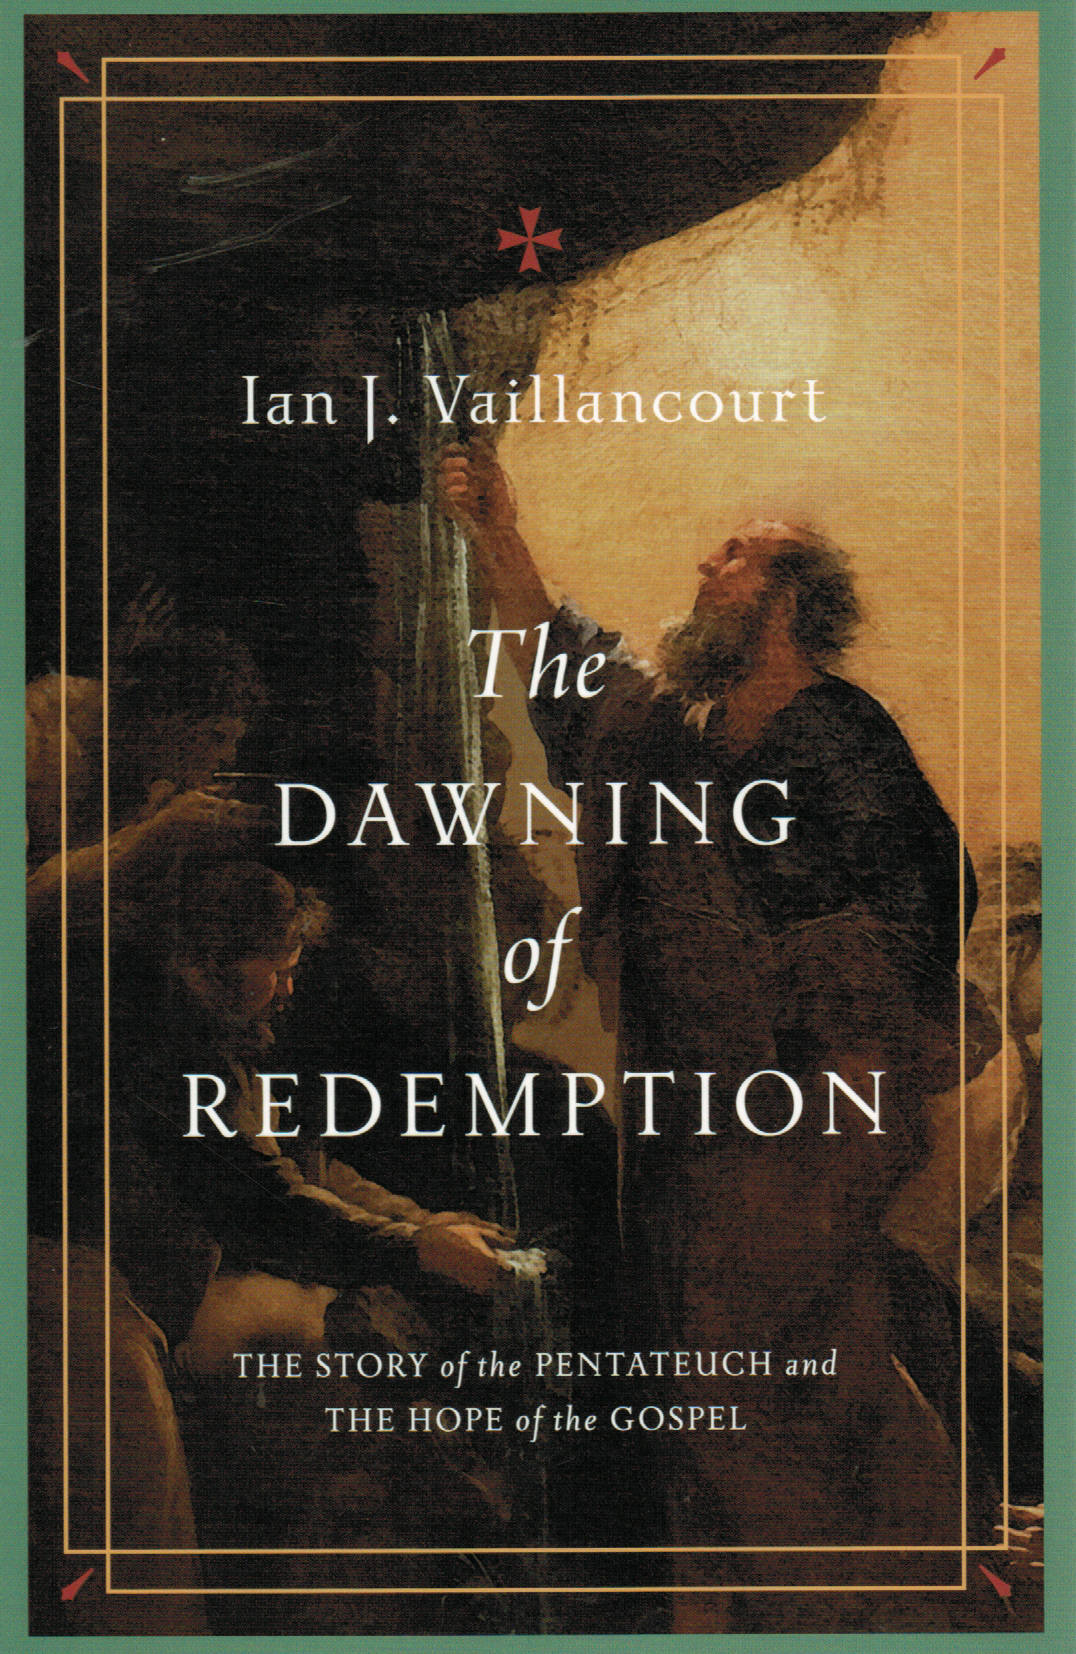 The Dawning of Redemption: The Story of the Pentateuch and the Hope of the Gospel